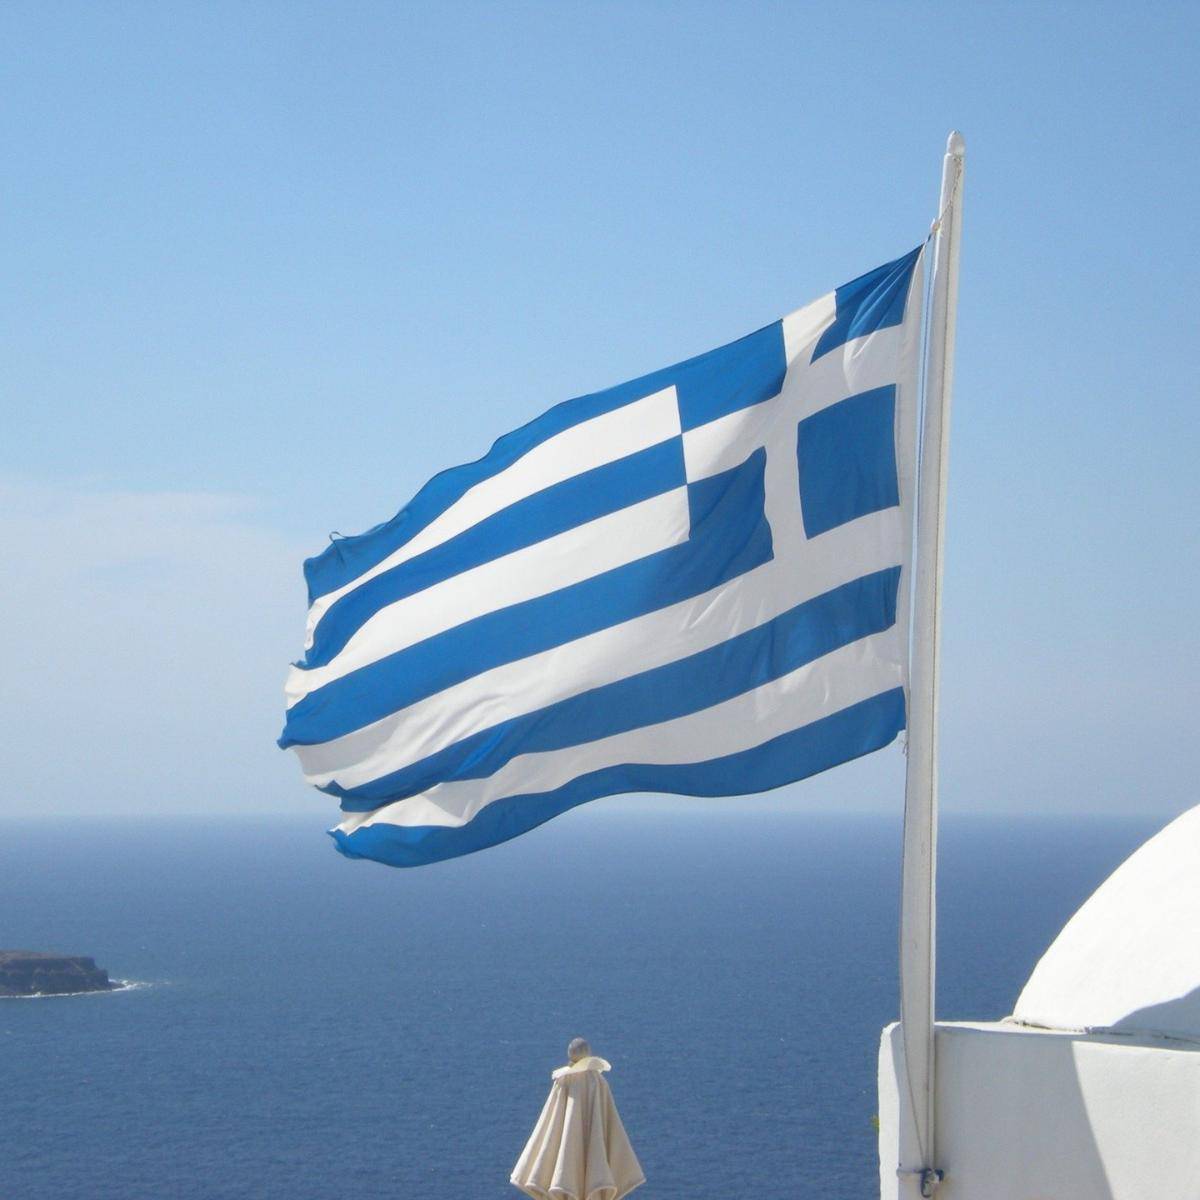 The Greek Flag in front of a blue sea.